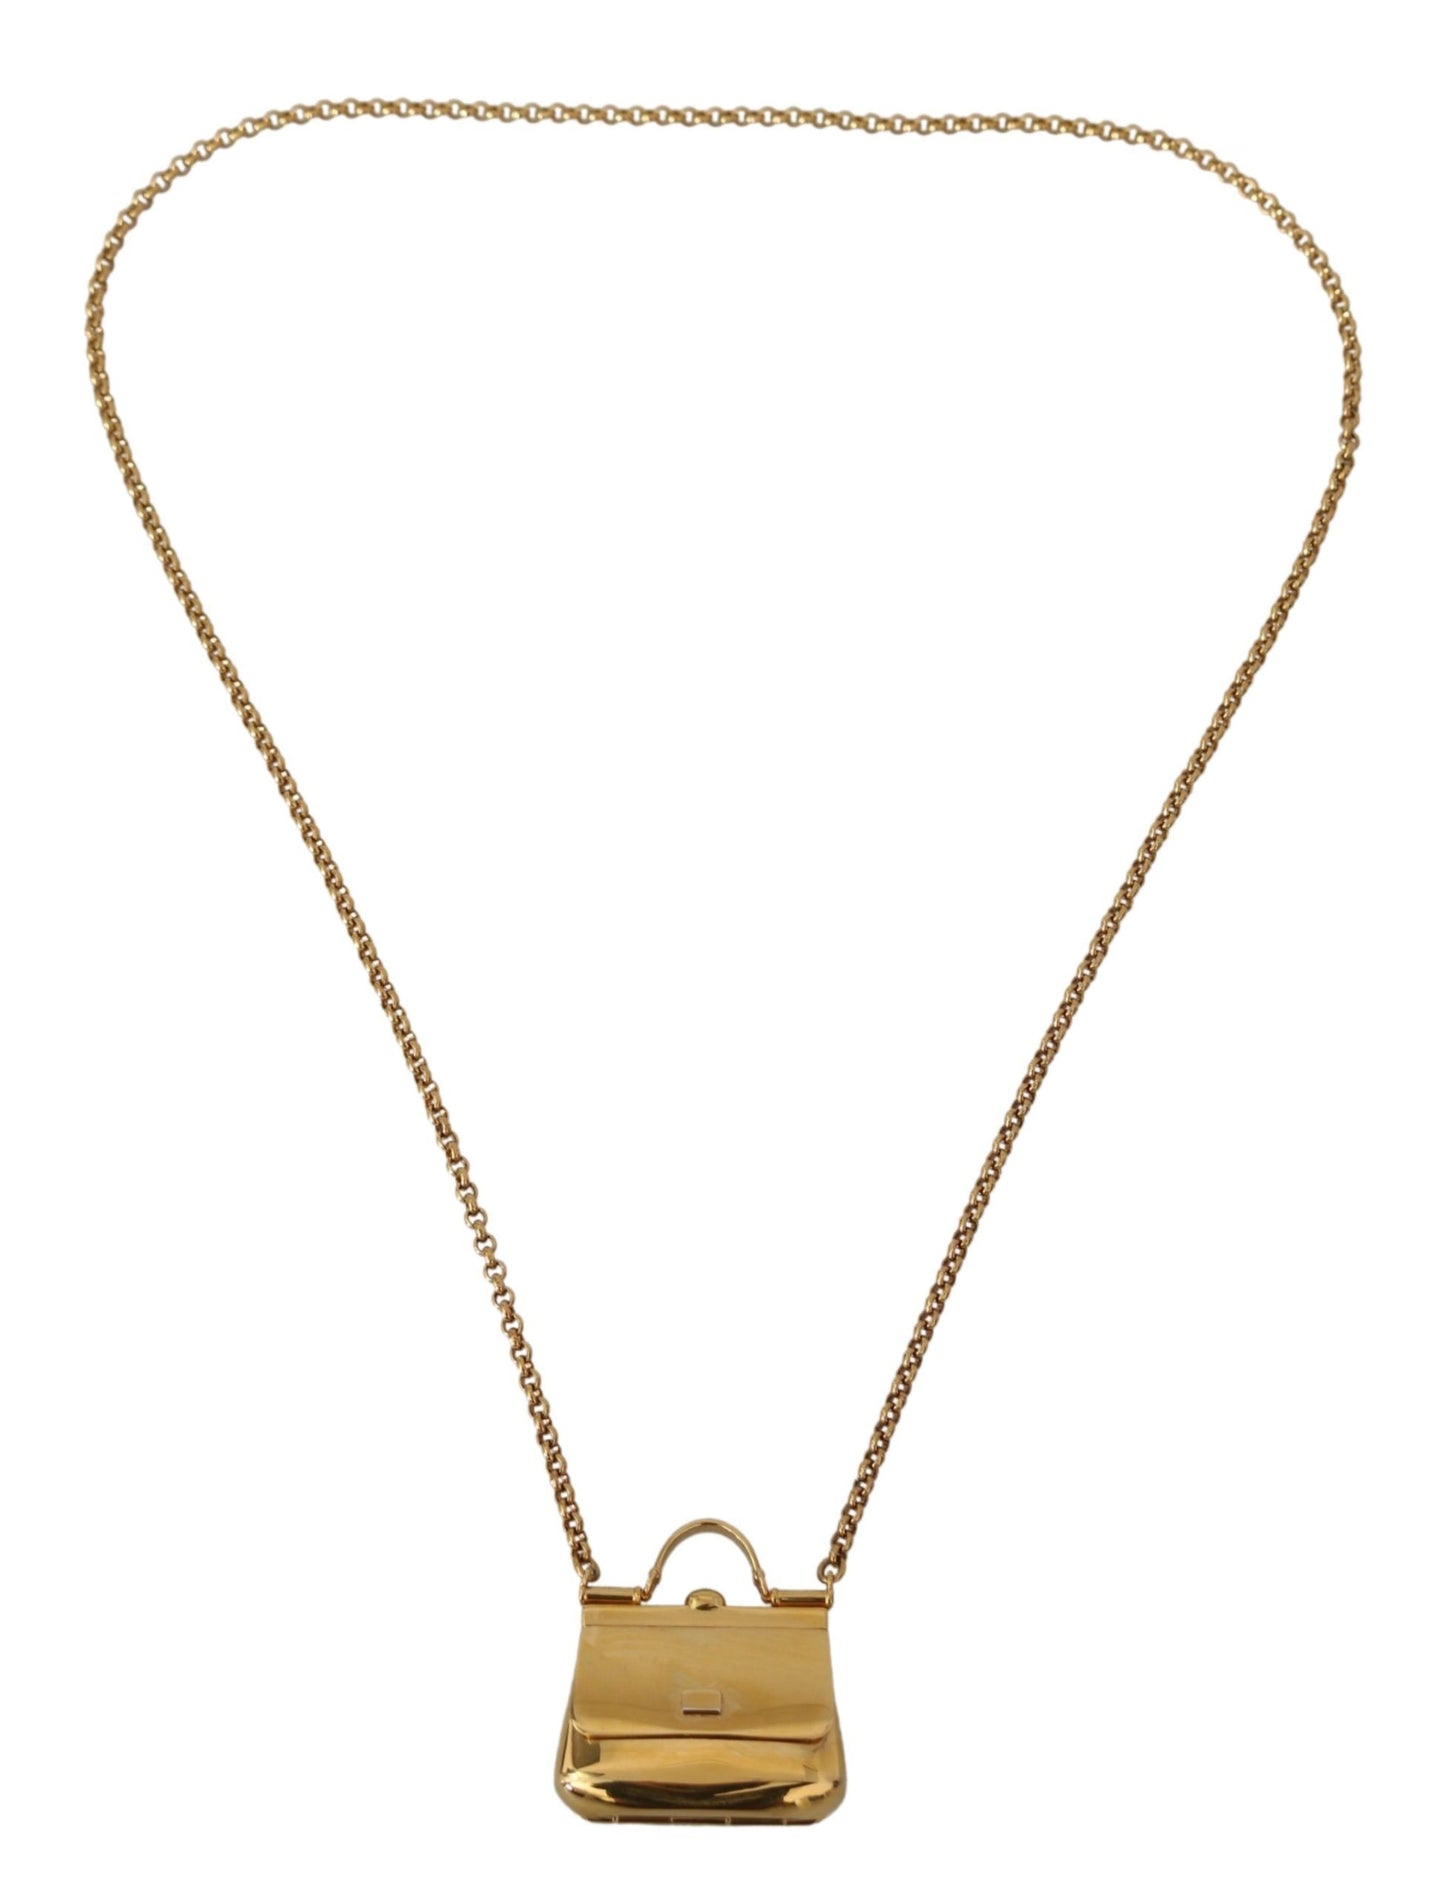 Charm Micro Bag Golden Necklace